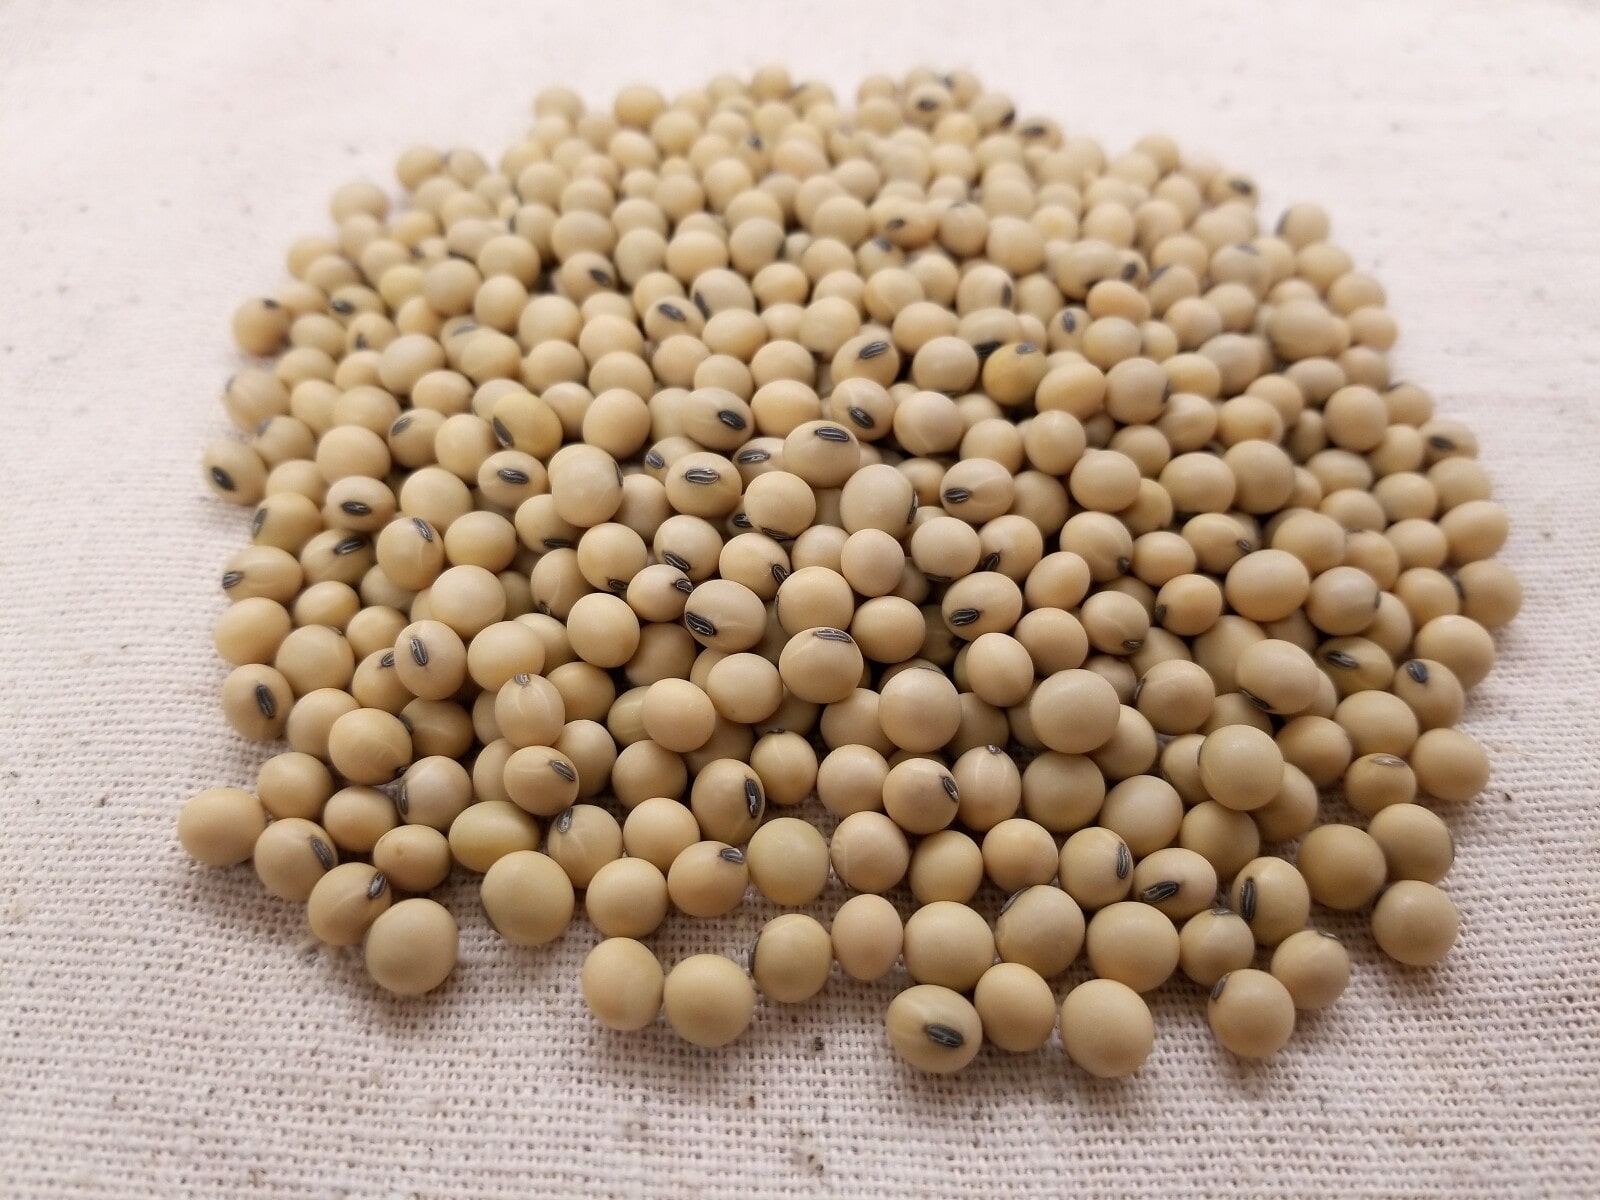 Soybeans on a table